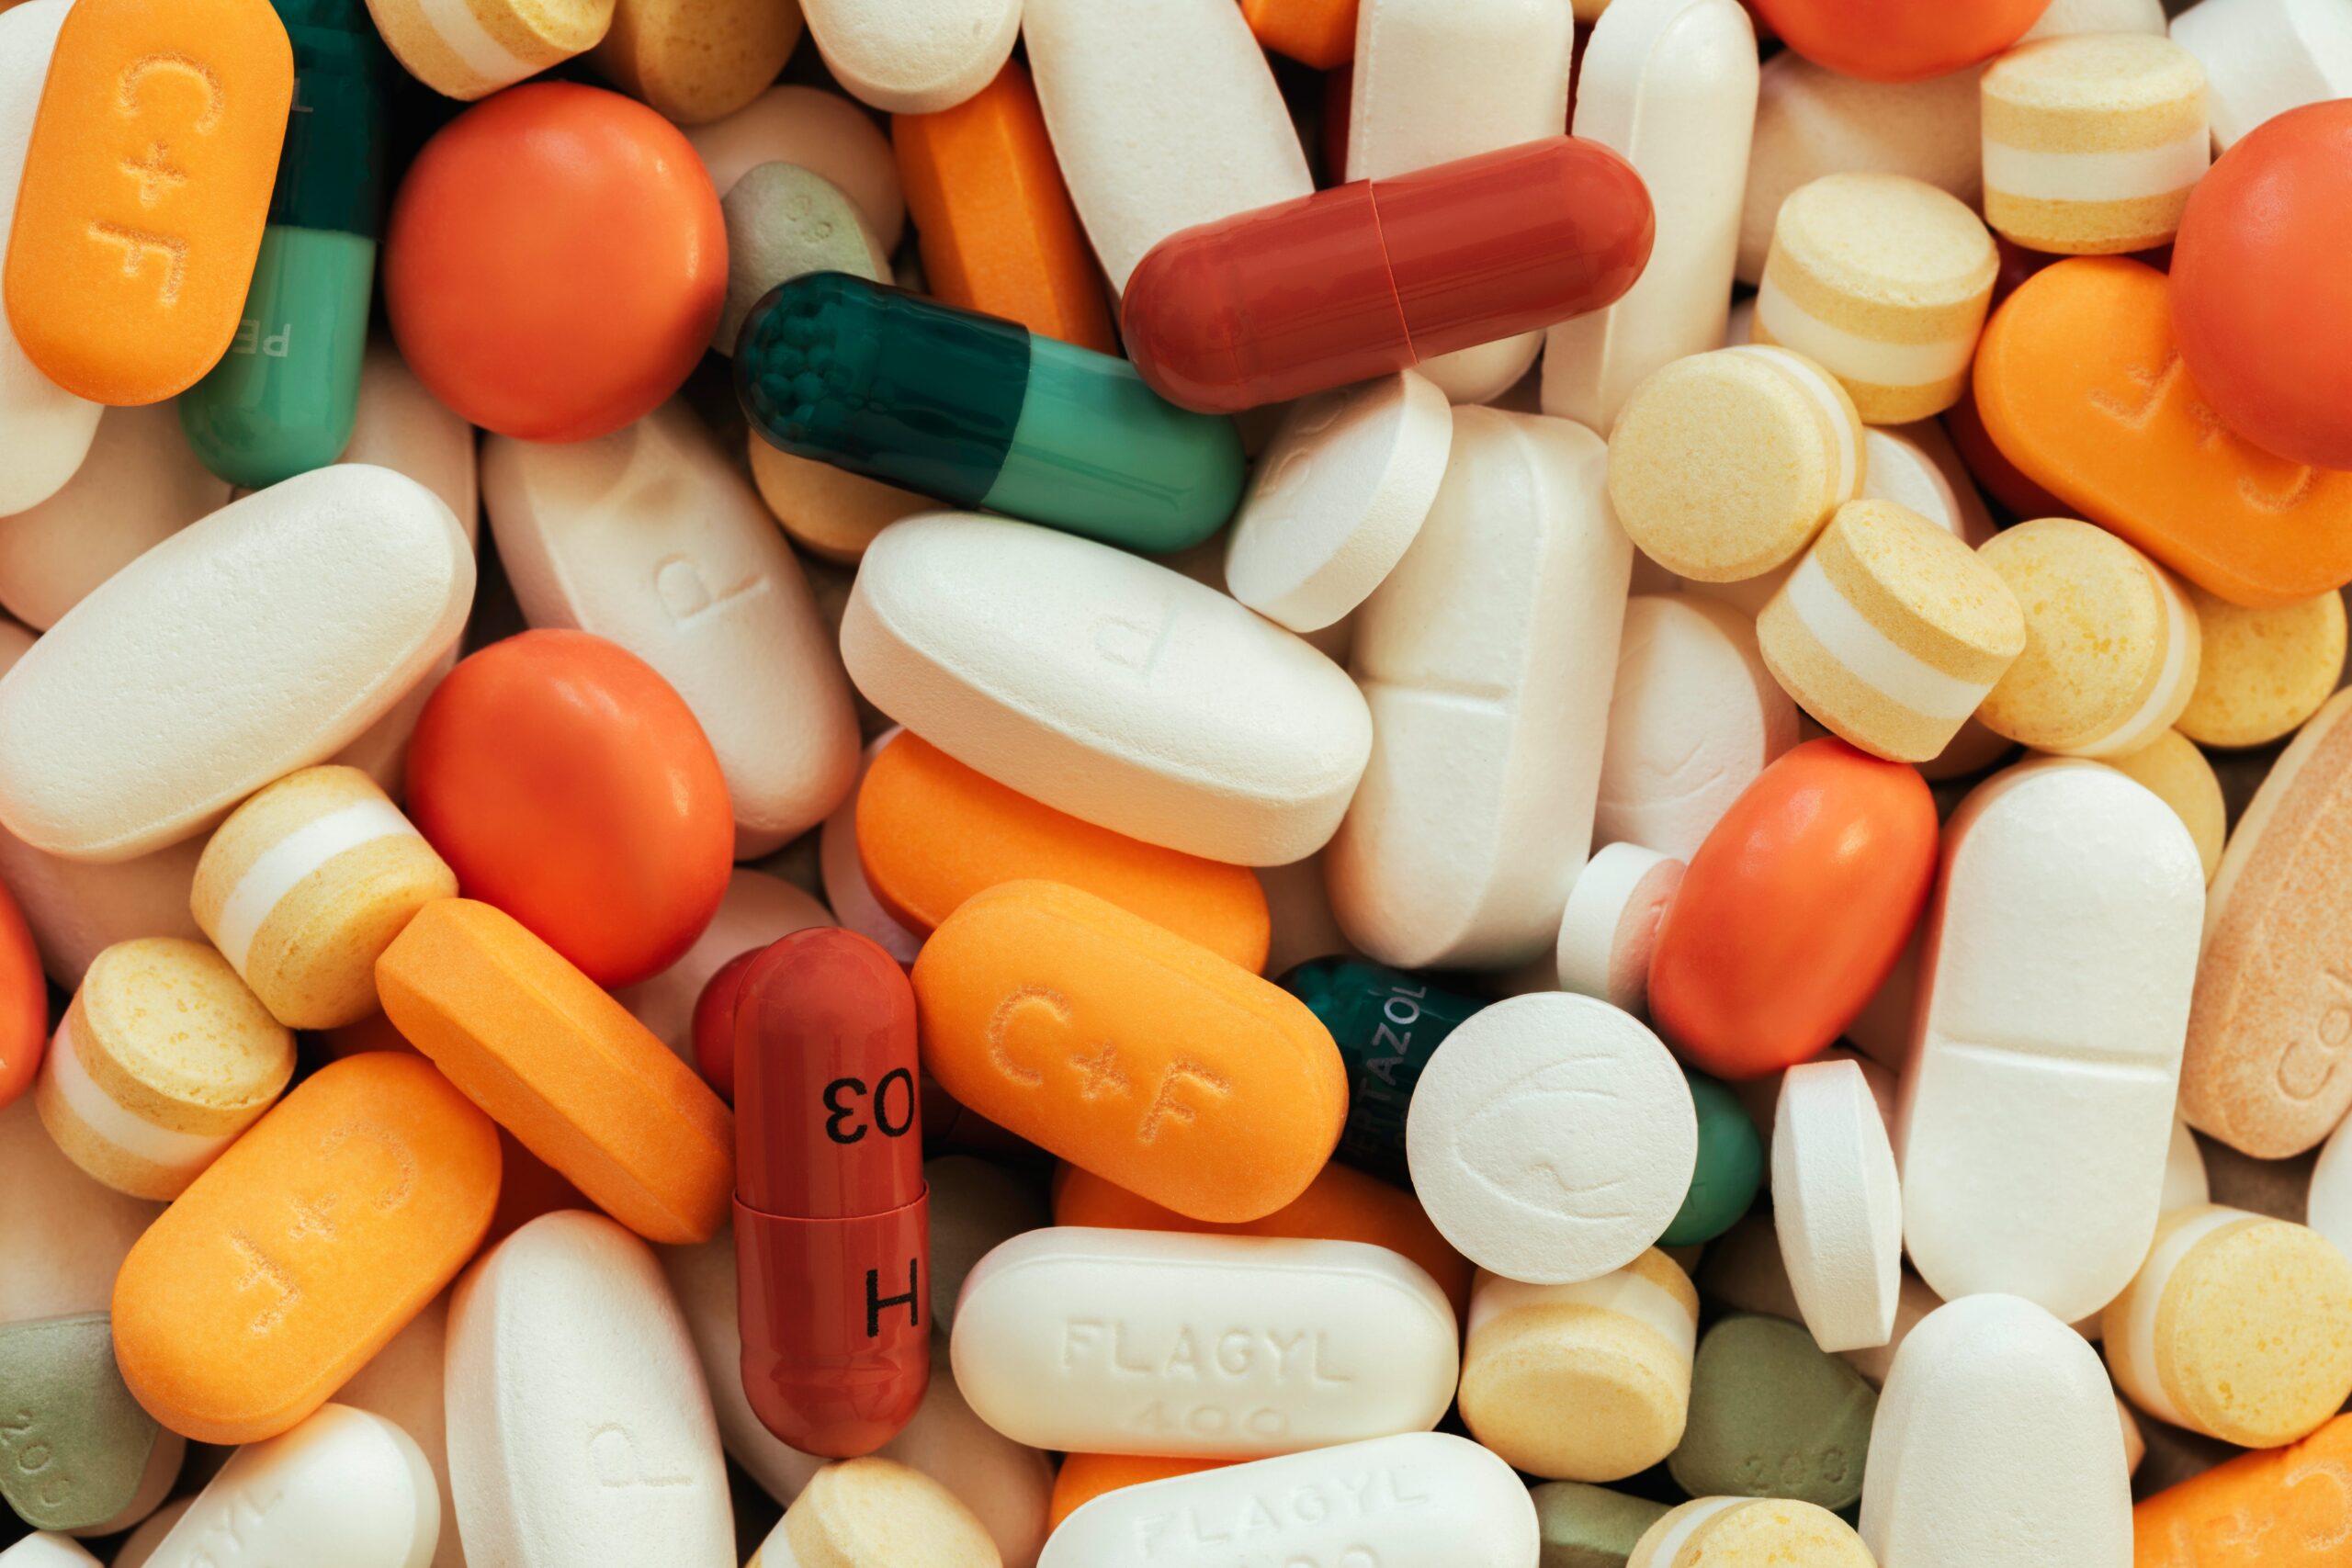 The Link Between Prescription Drugs and Substance Abuse